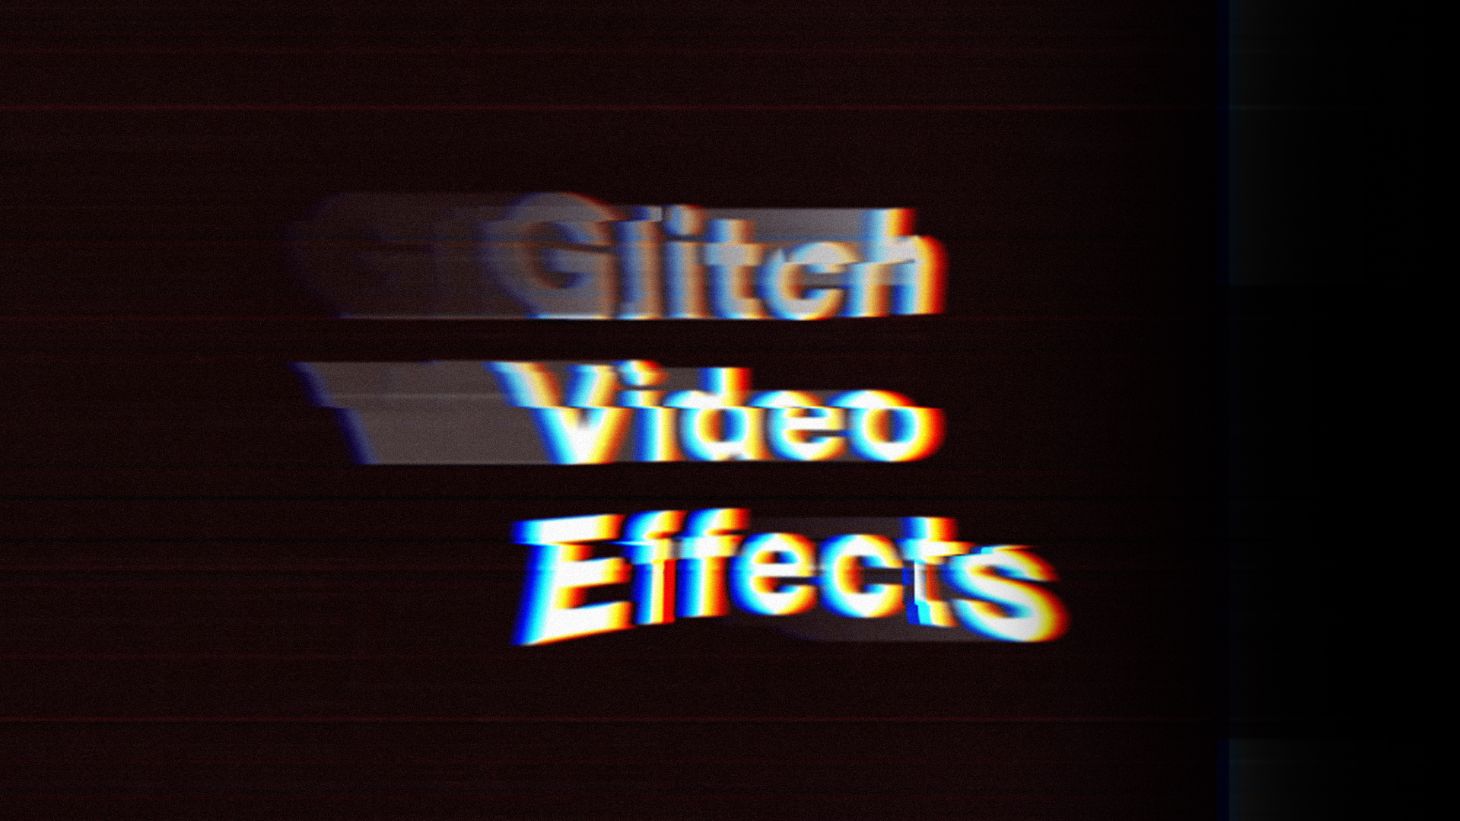 25 Free & Premium Glitch Video Effects Ready to Download | Motion Array